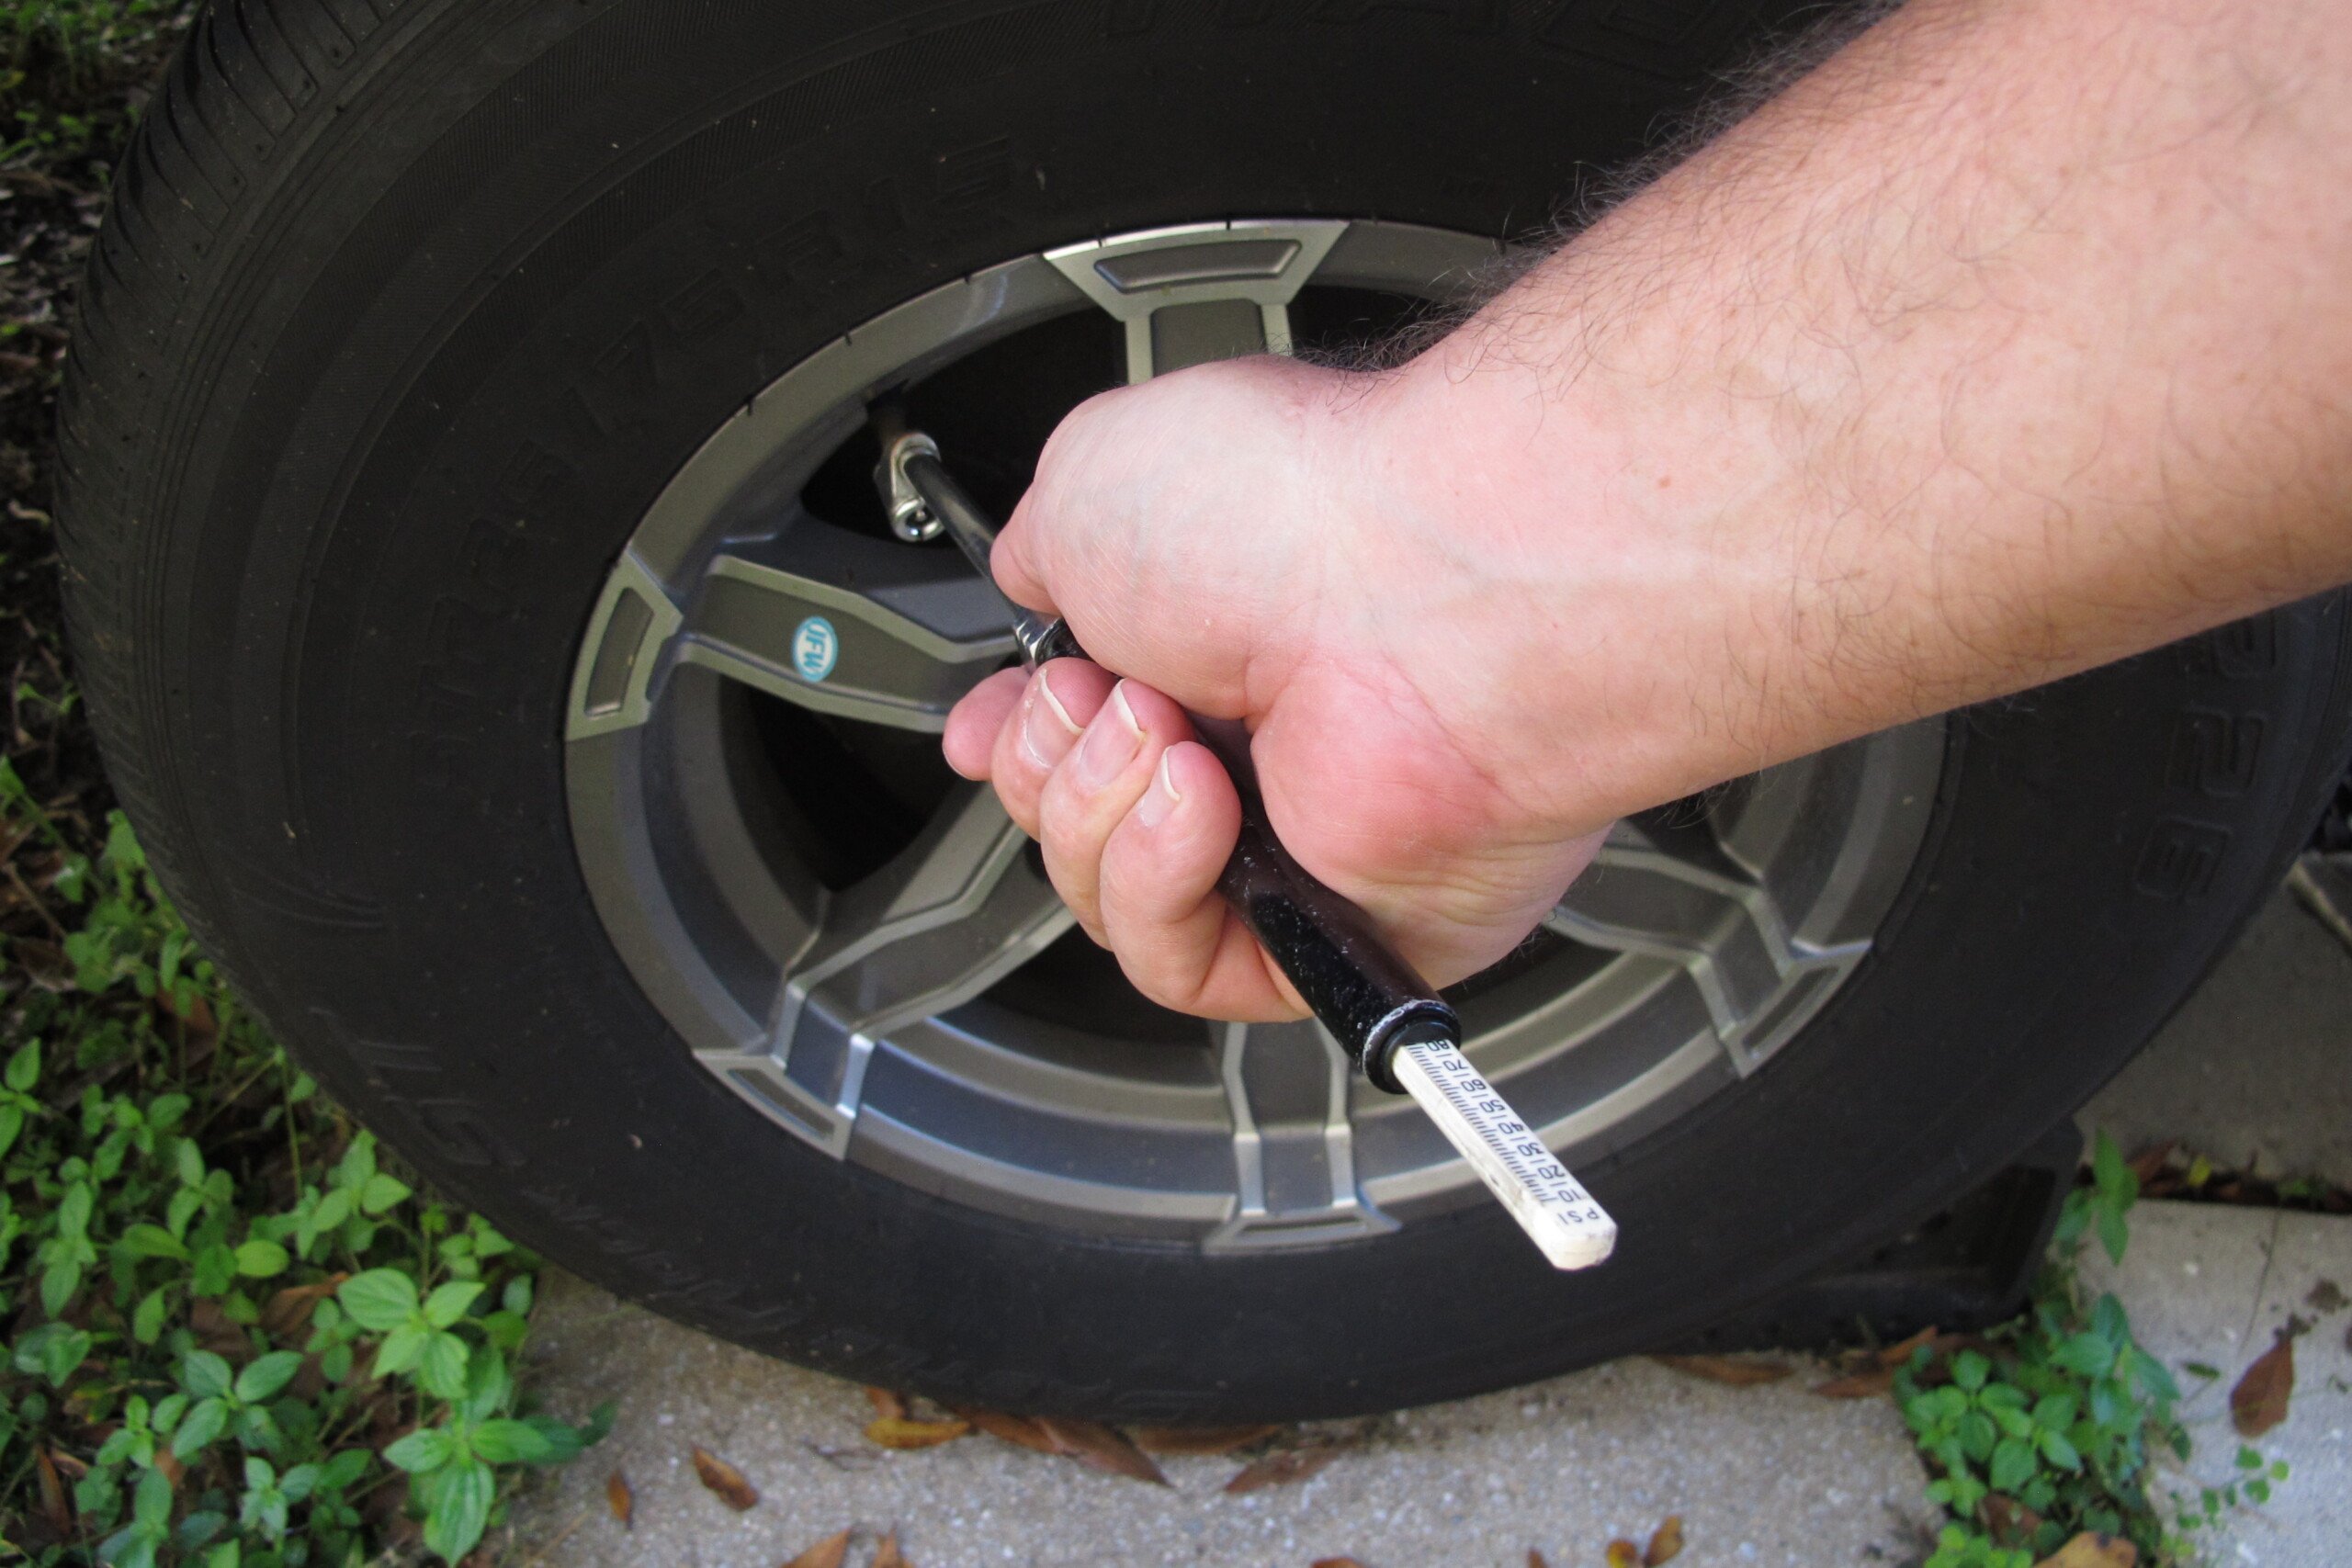 Add Trailer TPMS For Safer Trailer Towing